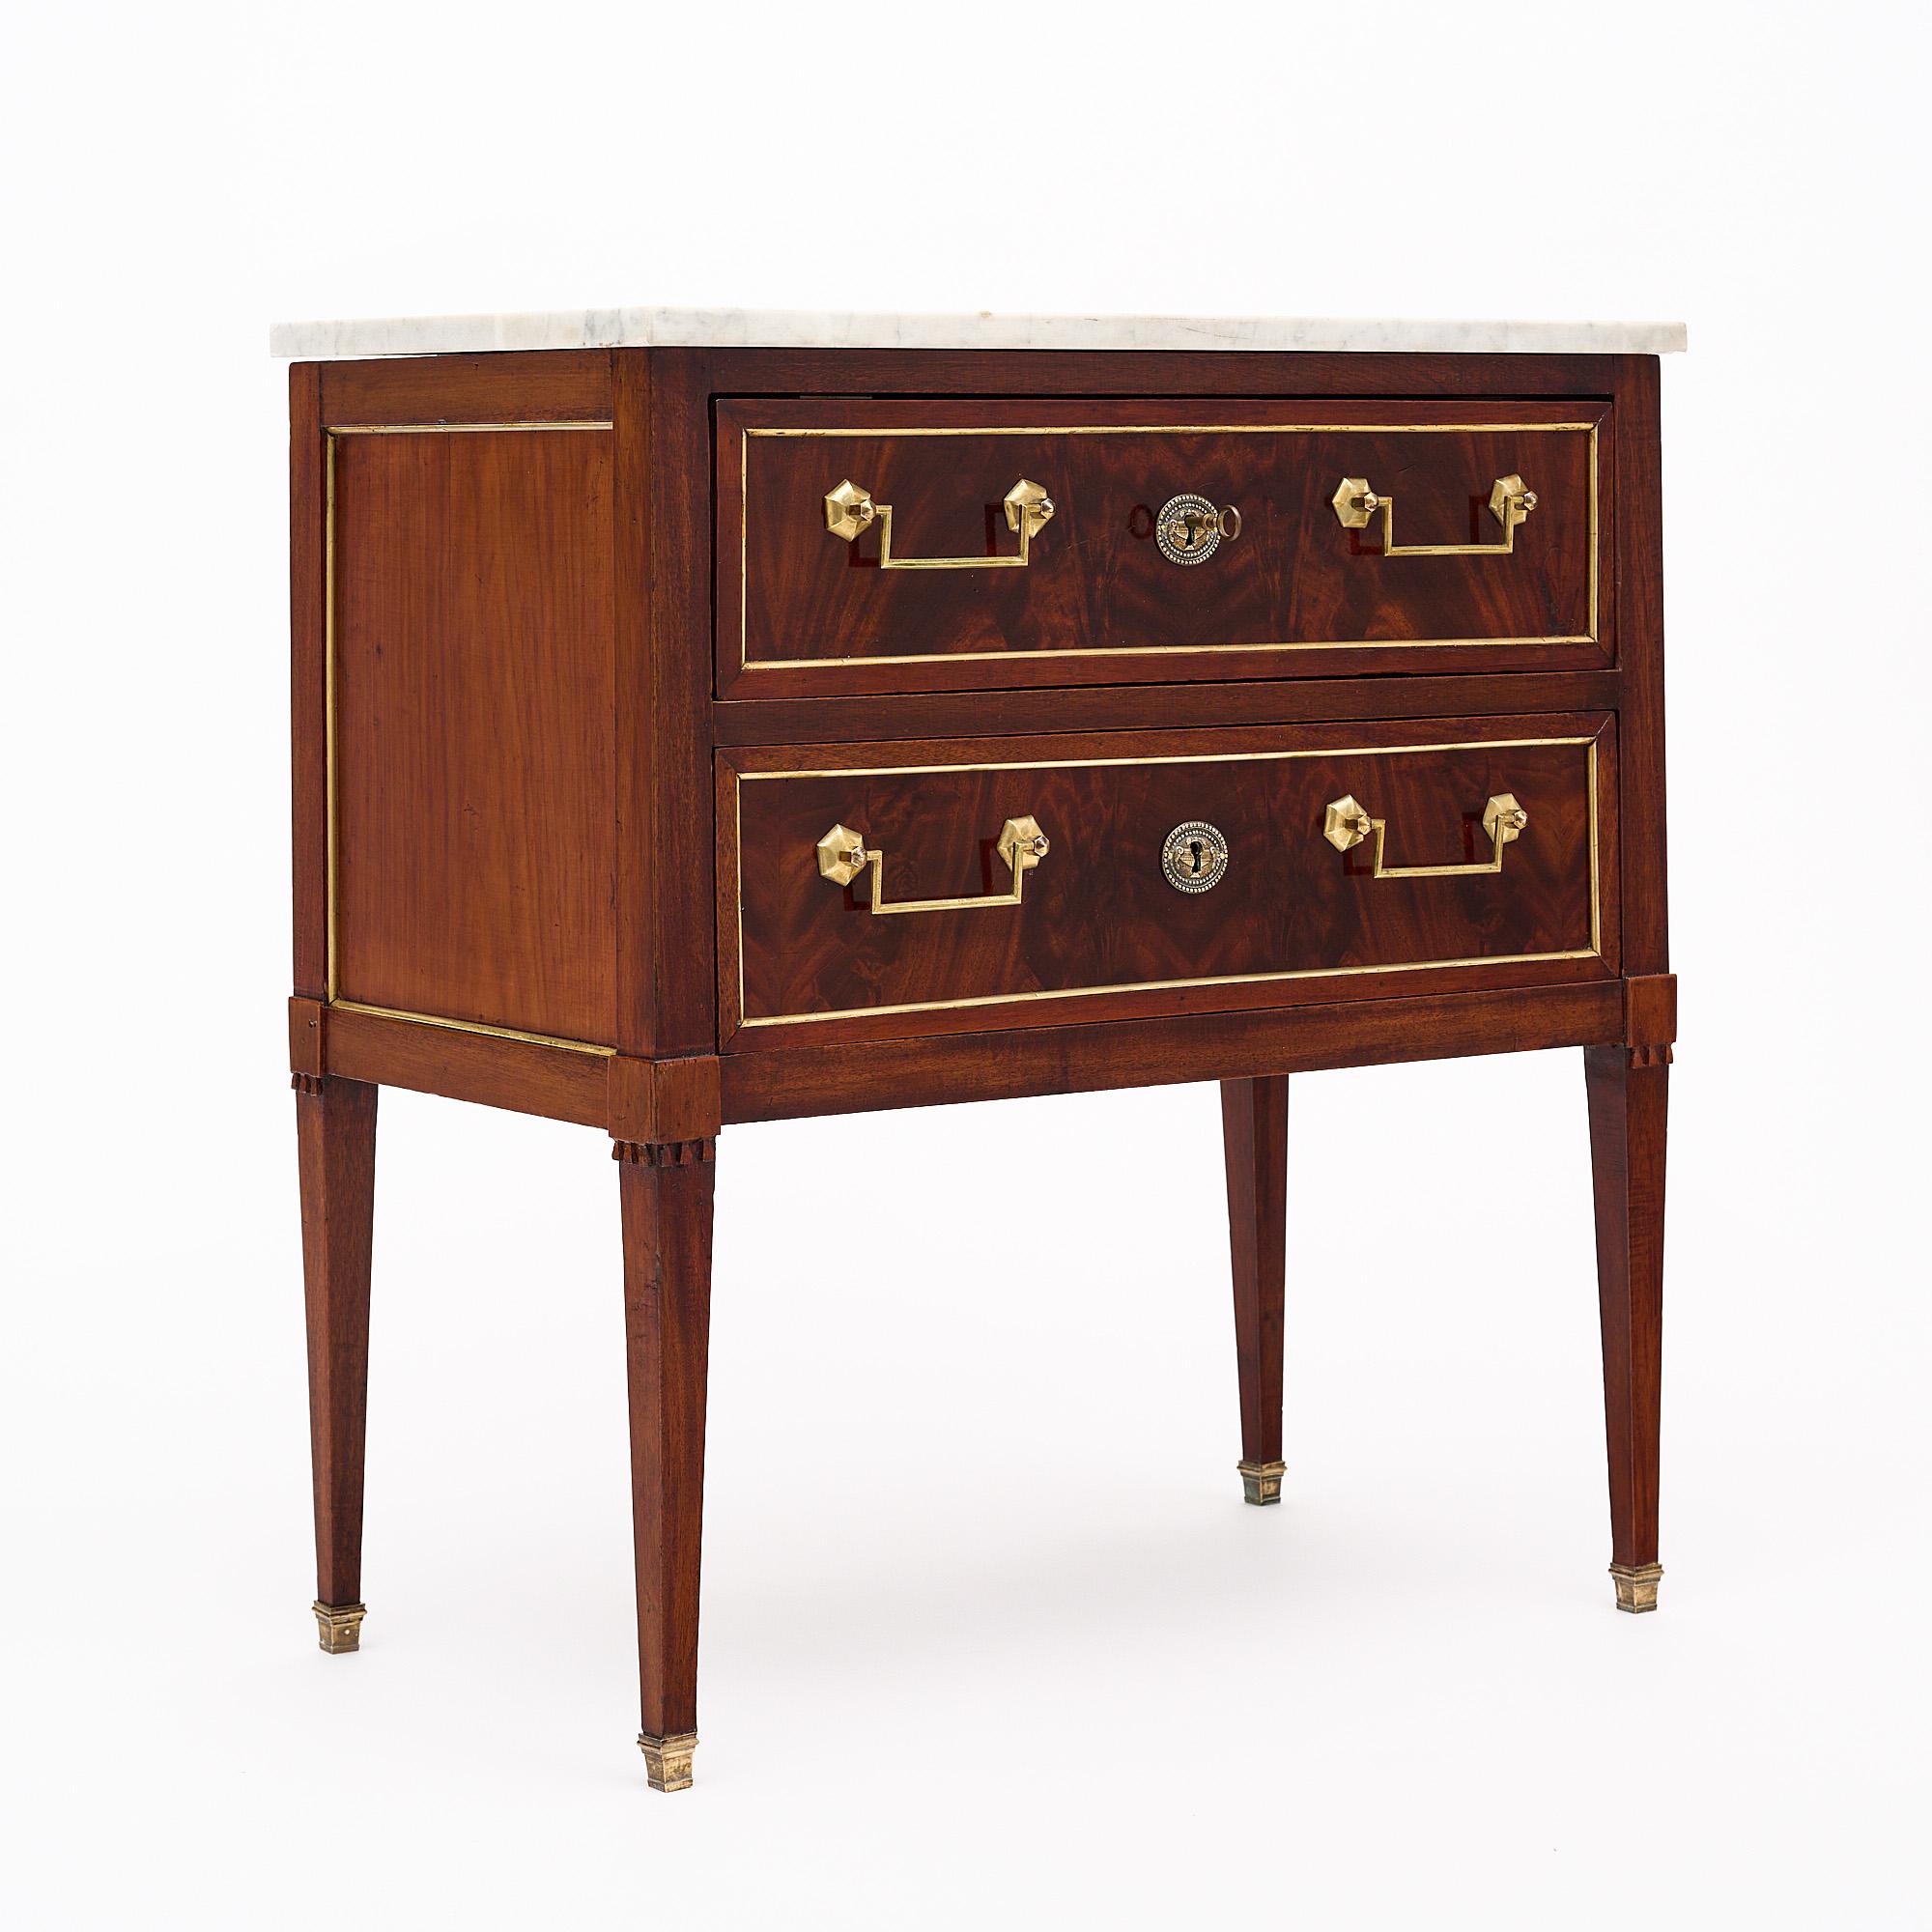 French antique chest of drawers, styled after the elegant Louis XVI era. Crafted from cherrywood and adorned with burled cherrywood, its two dovetailed drawers exude sophistication, complemented by luxurious gilt bronze hardware. Delicate